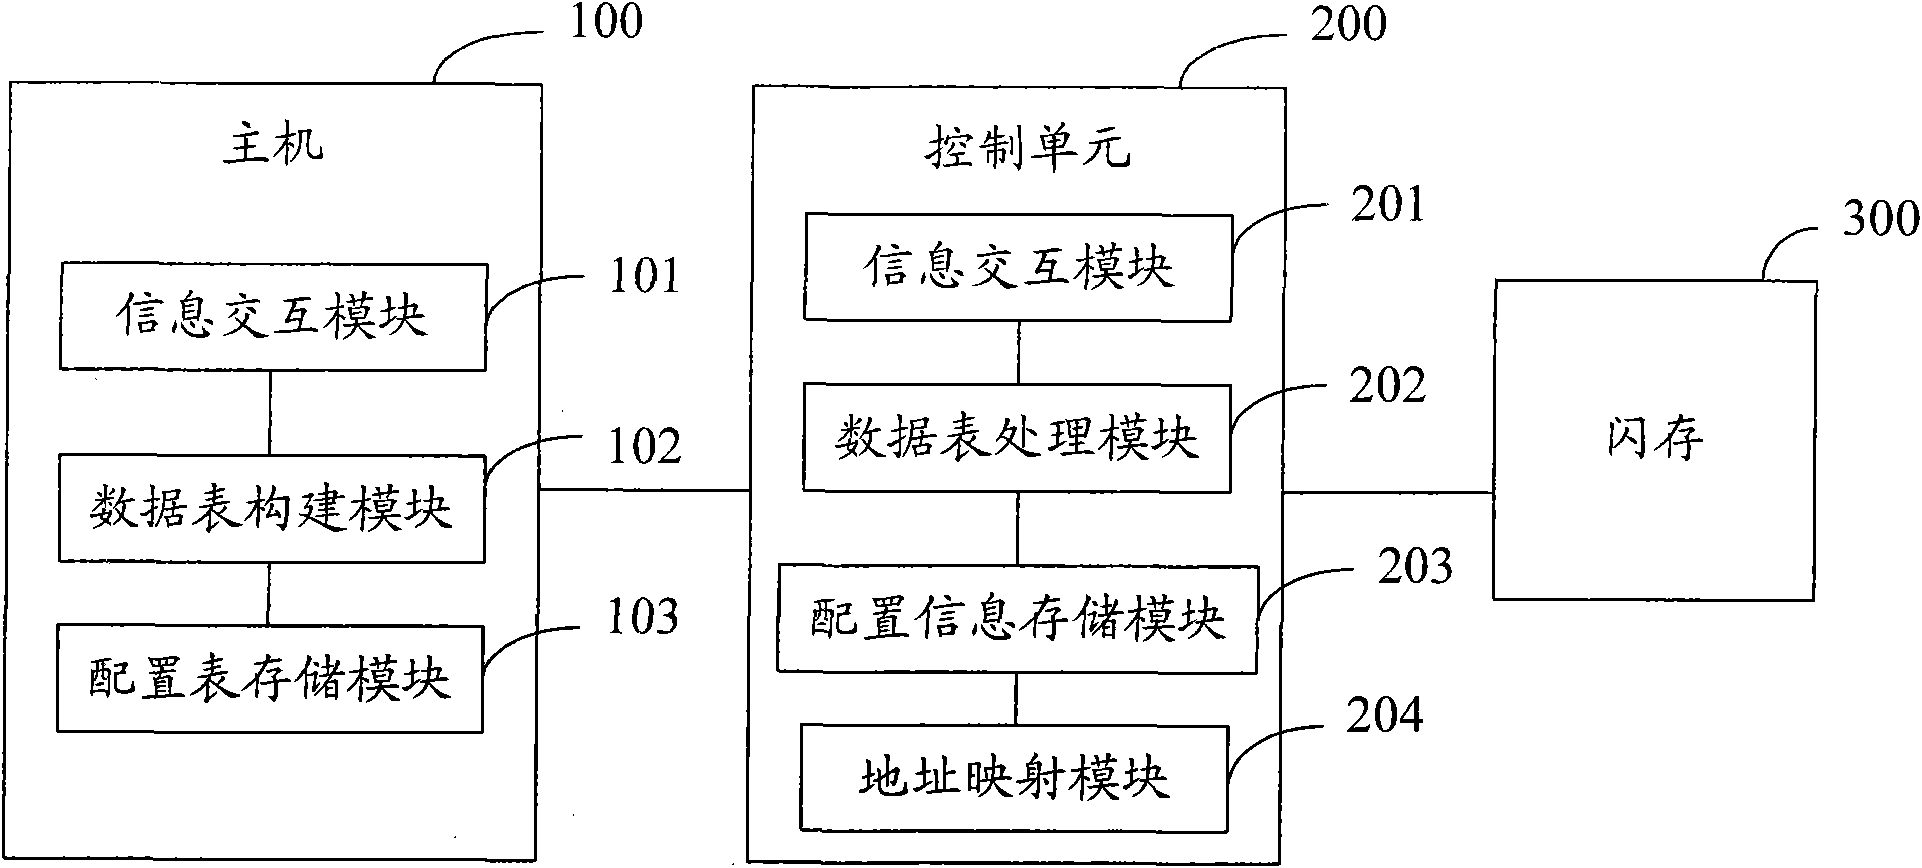 Flash memory equipment, method and system for managing flash memory